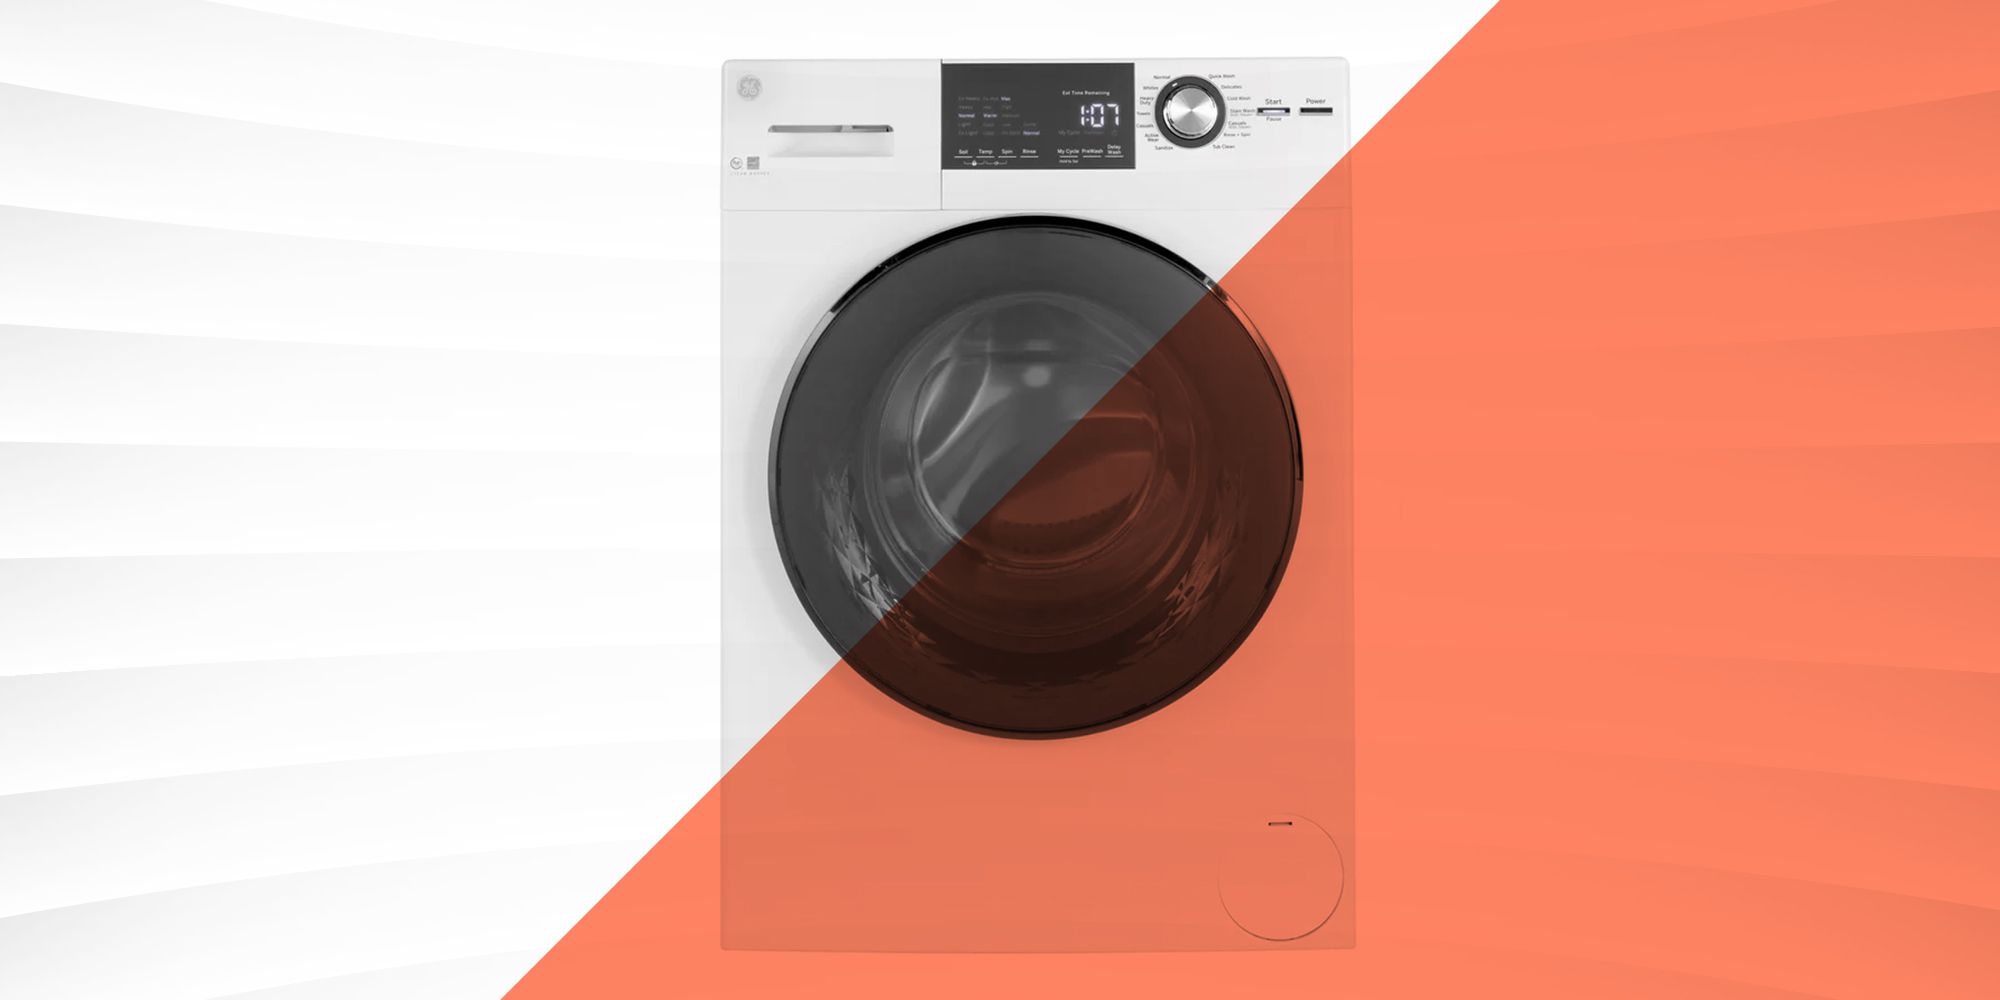 Portable Washing Machine Review 2021: Save Time and Money on Laundry